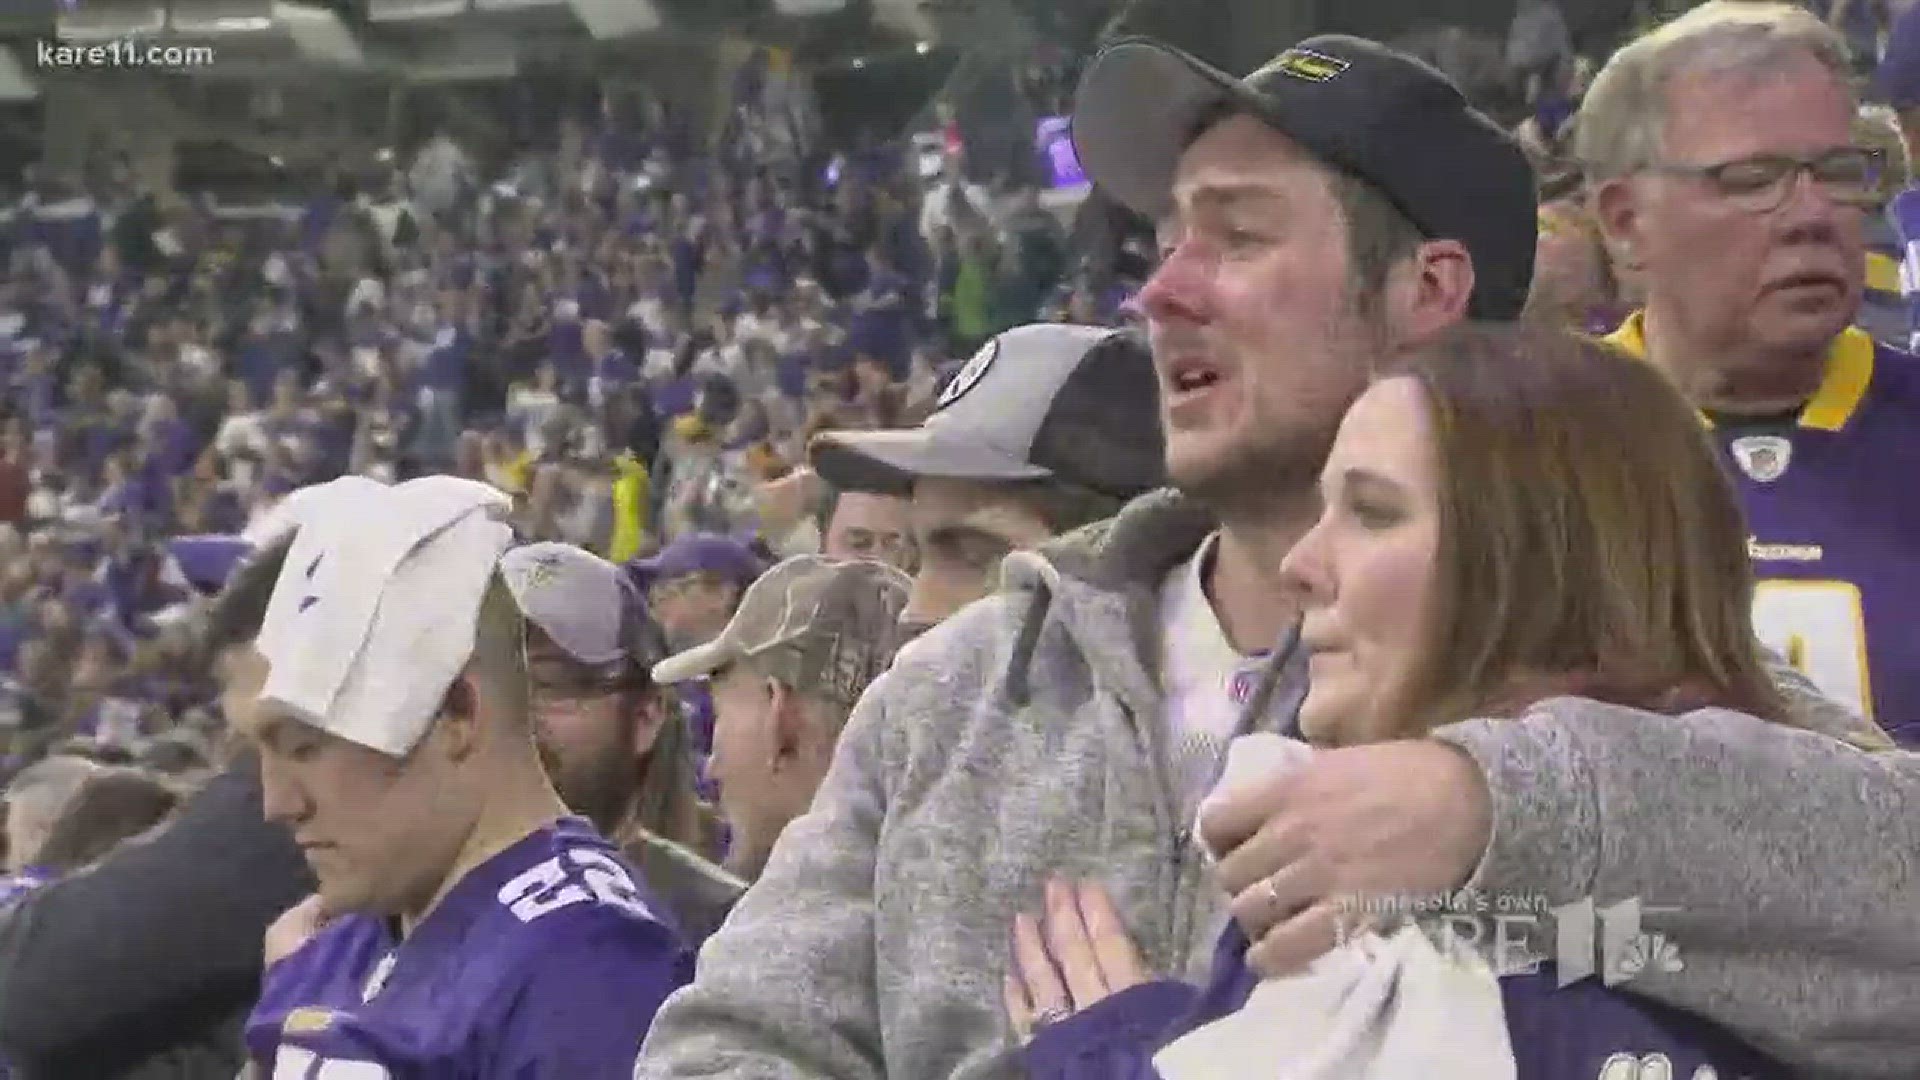 The official playoff slogan for the Vikings is "Bring it home." But it may as well be "This year's different."